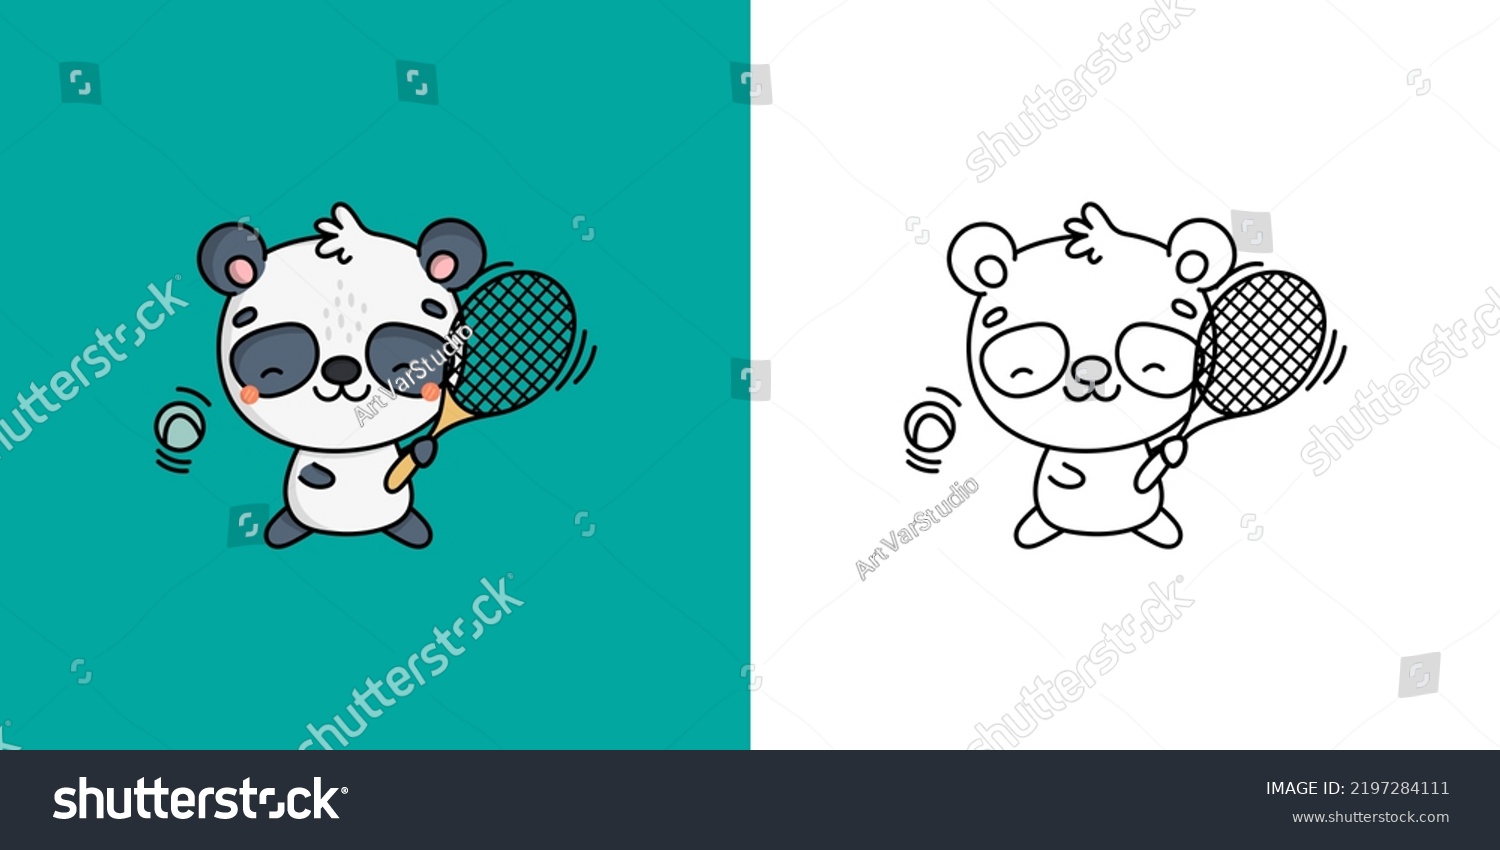 SVG of Set Clipart Panda Bear Athlete Coloring Page and Colored Illustration. Kawaii Panda Sportsman. Vector Illustration of a Kawaii Animal for Coloring Pages, Prints for Clothes, Stickers, Baby Shower.
 svg